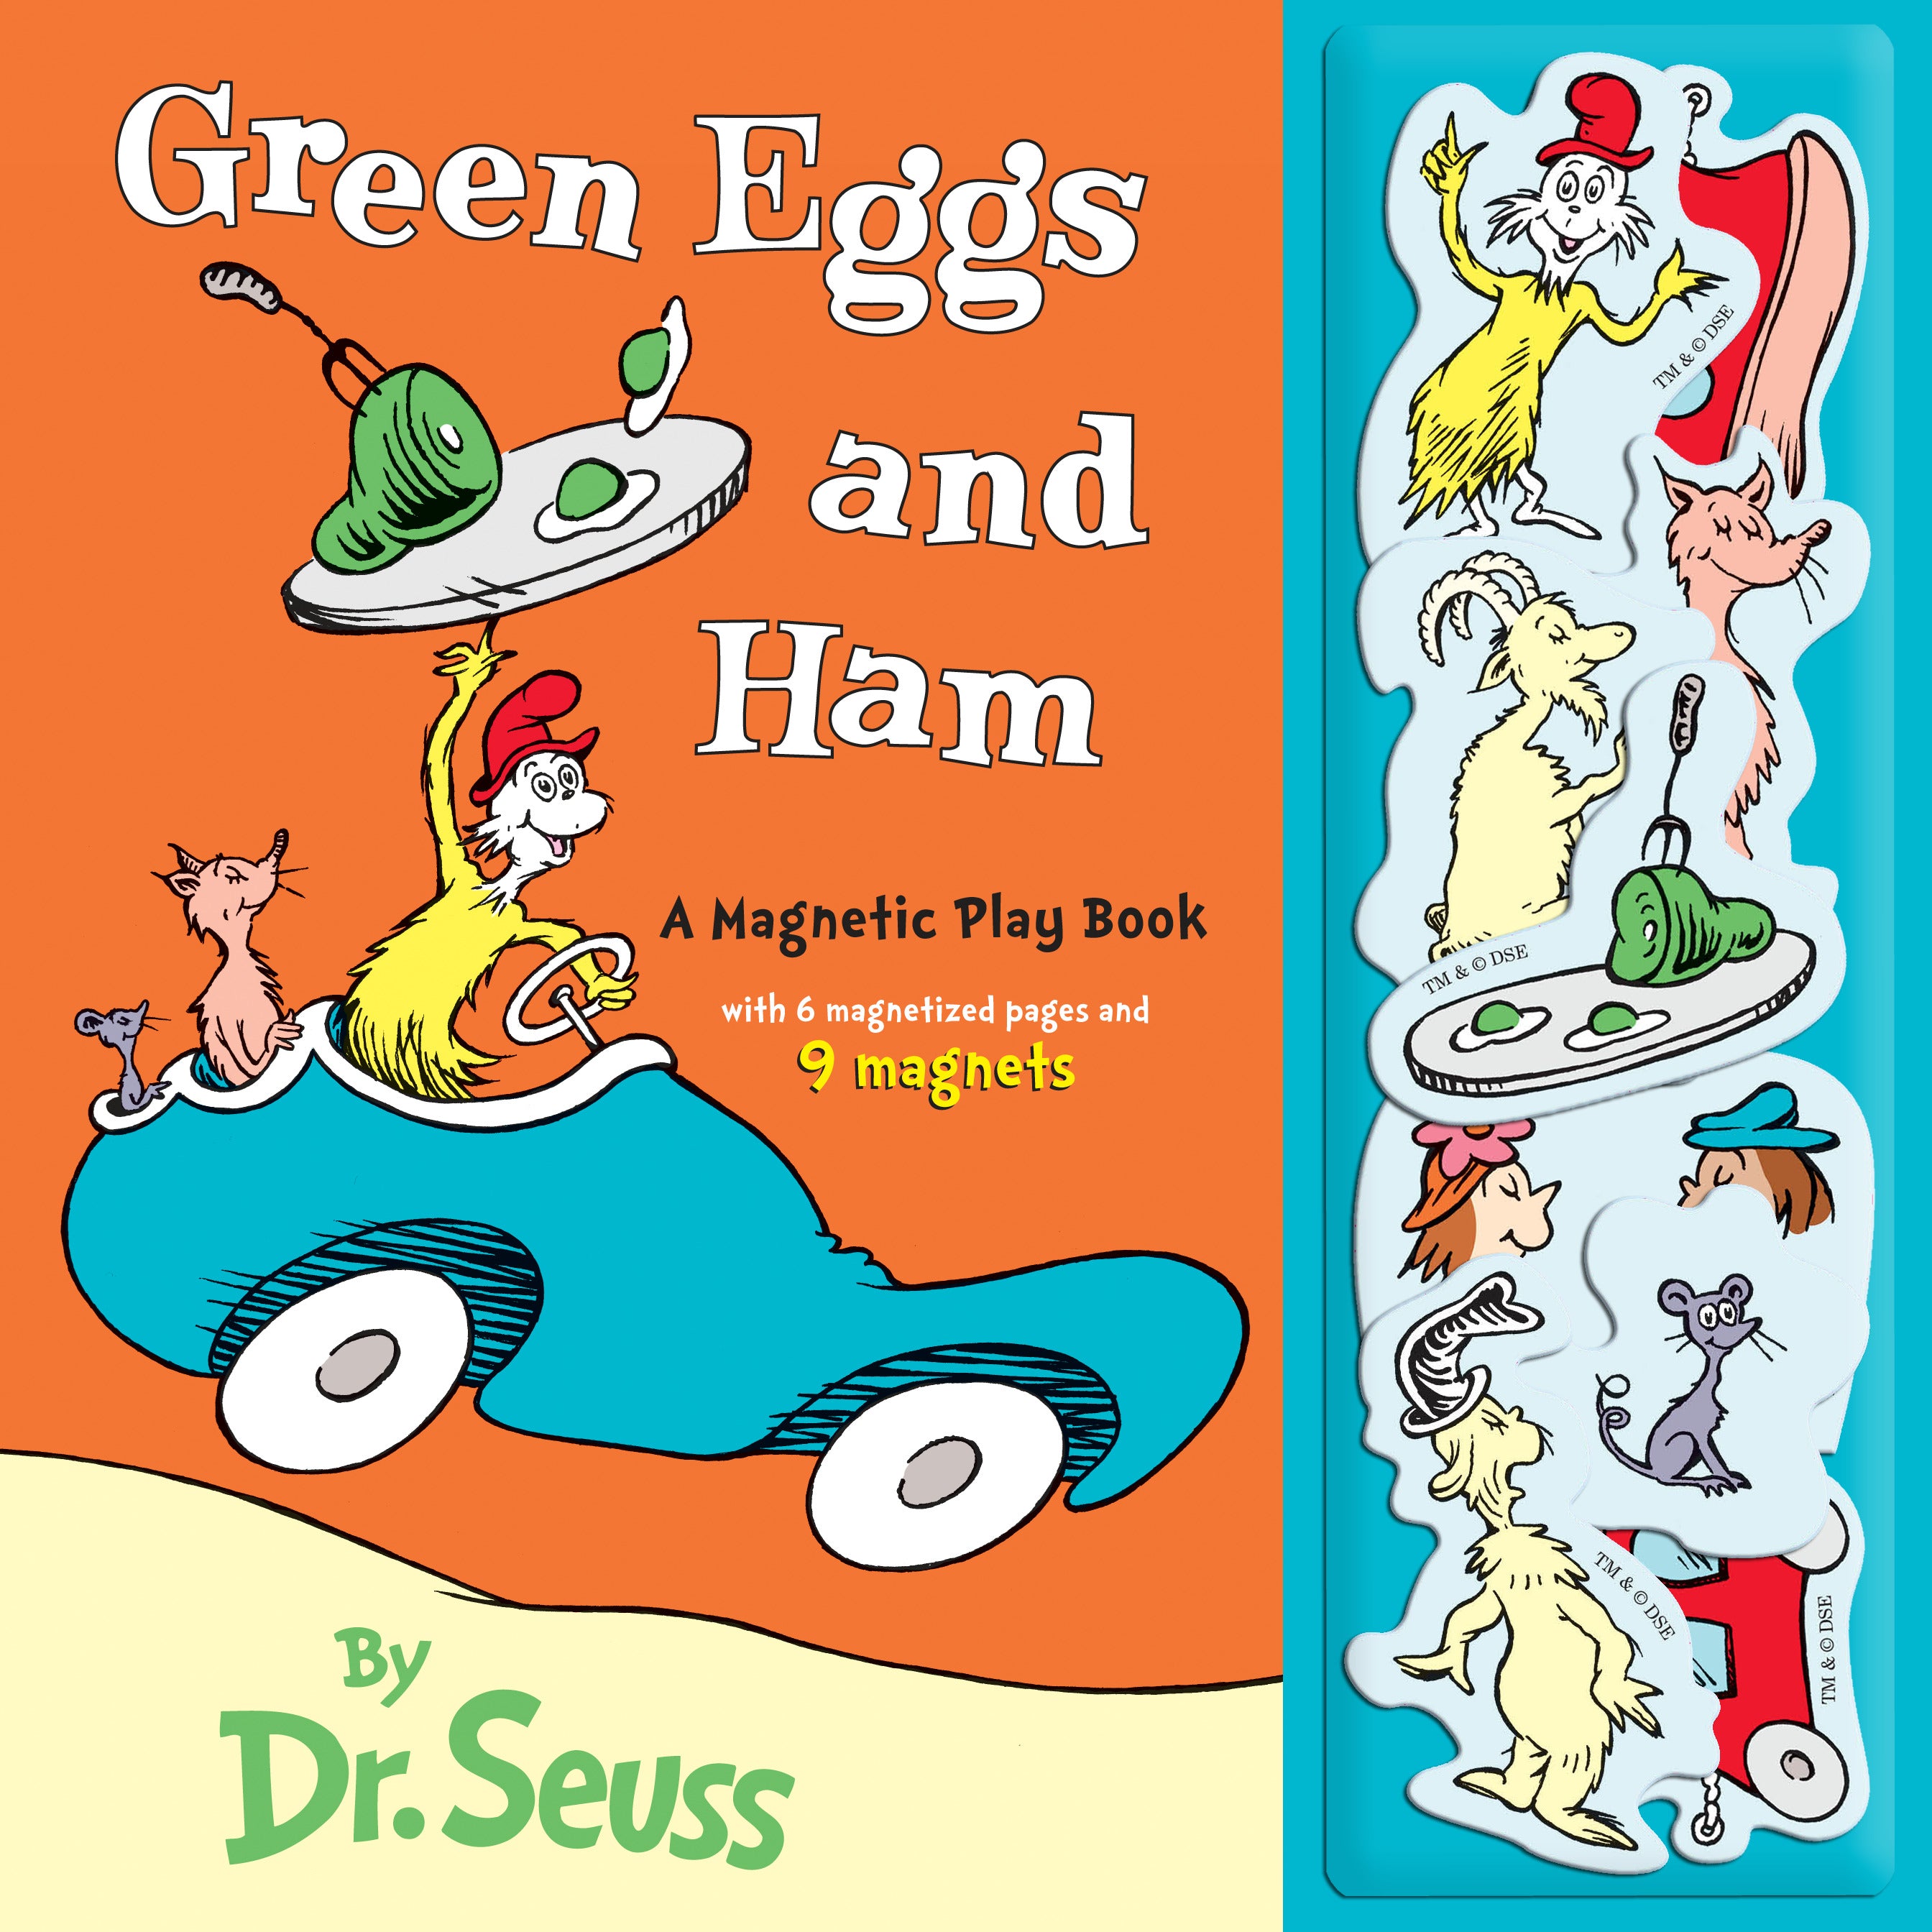 Green Eggs and Ham : A Magnetic Play Book